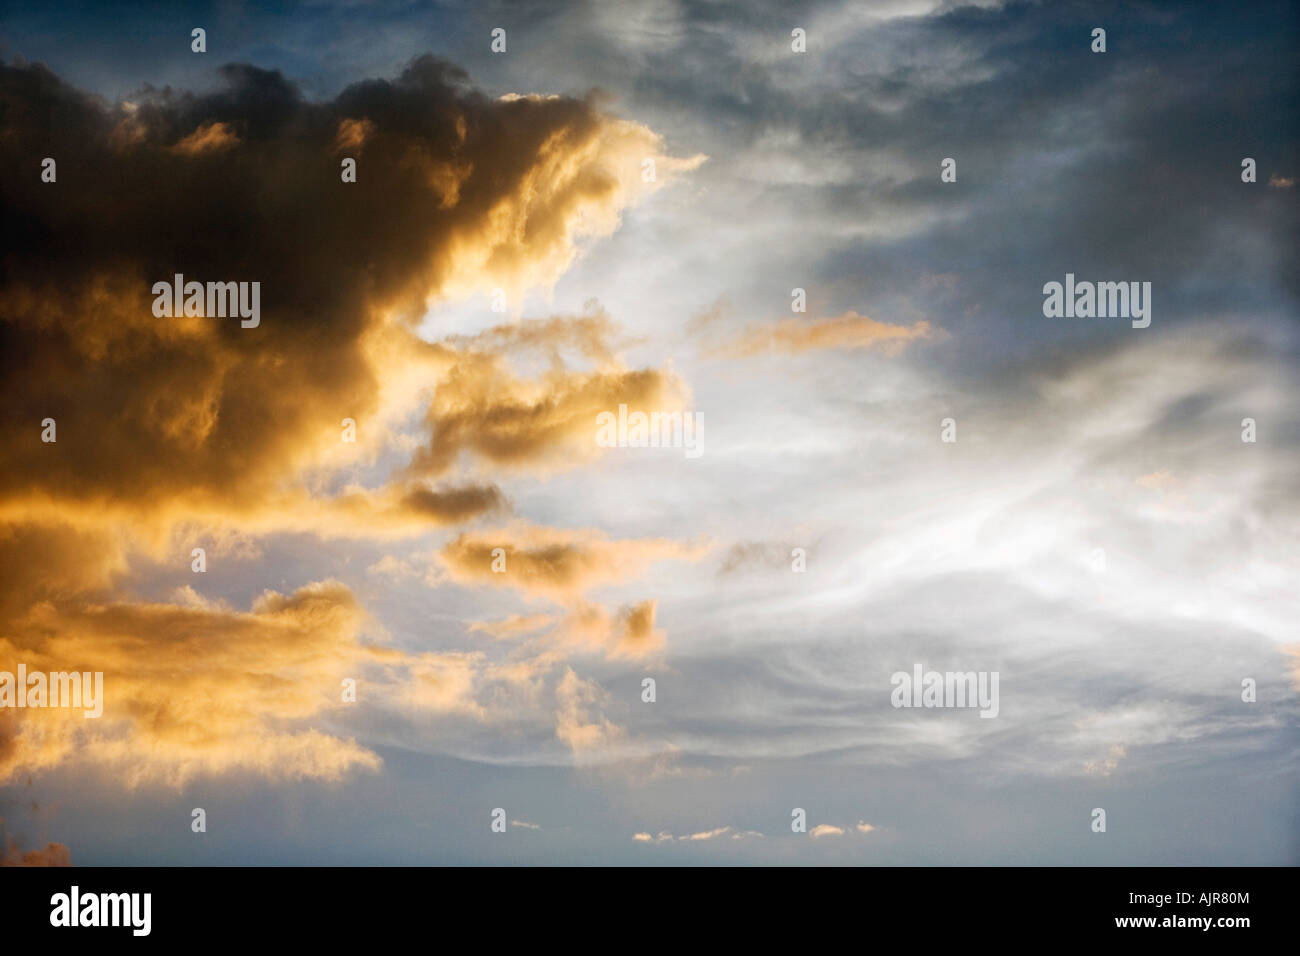 Sunset storm clouds in India. Indian cloudy sky in the evening sunlight Stock Photo